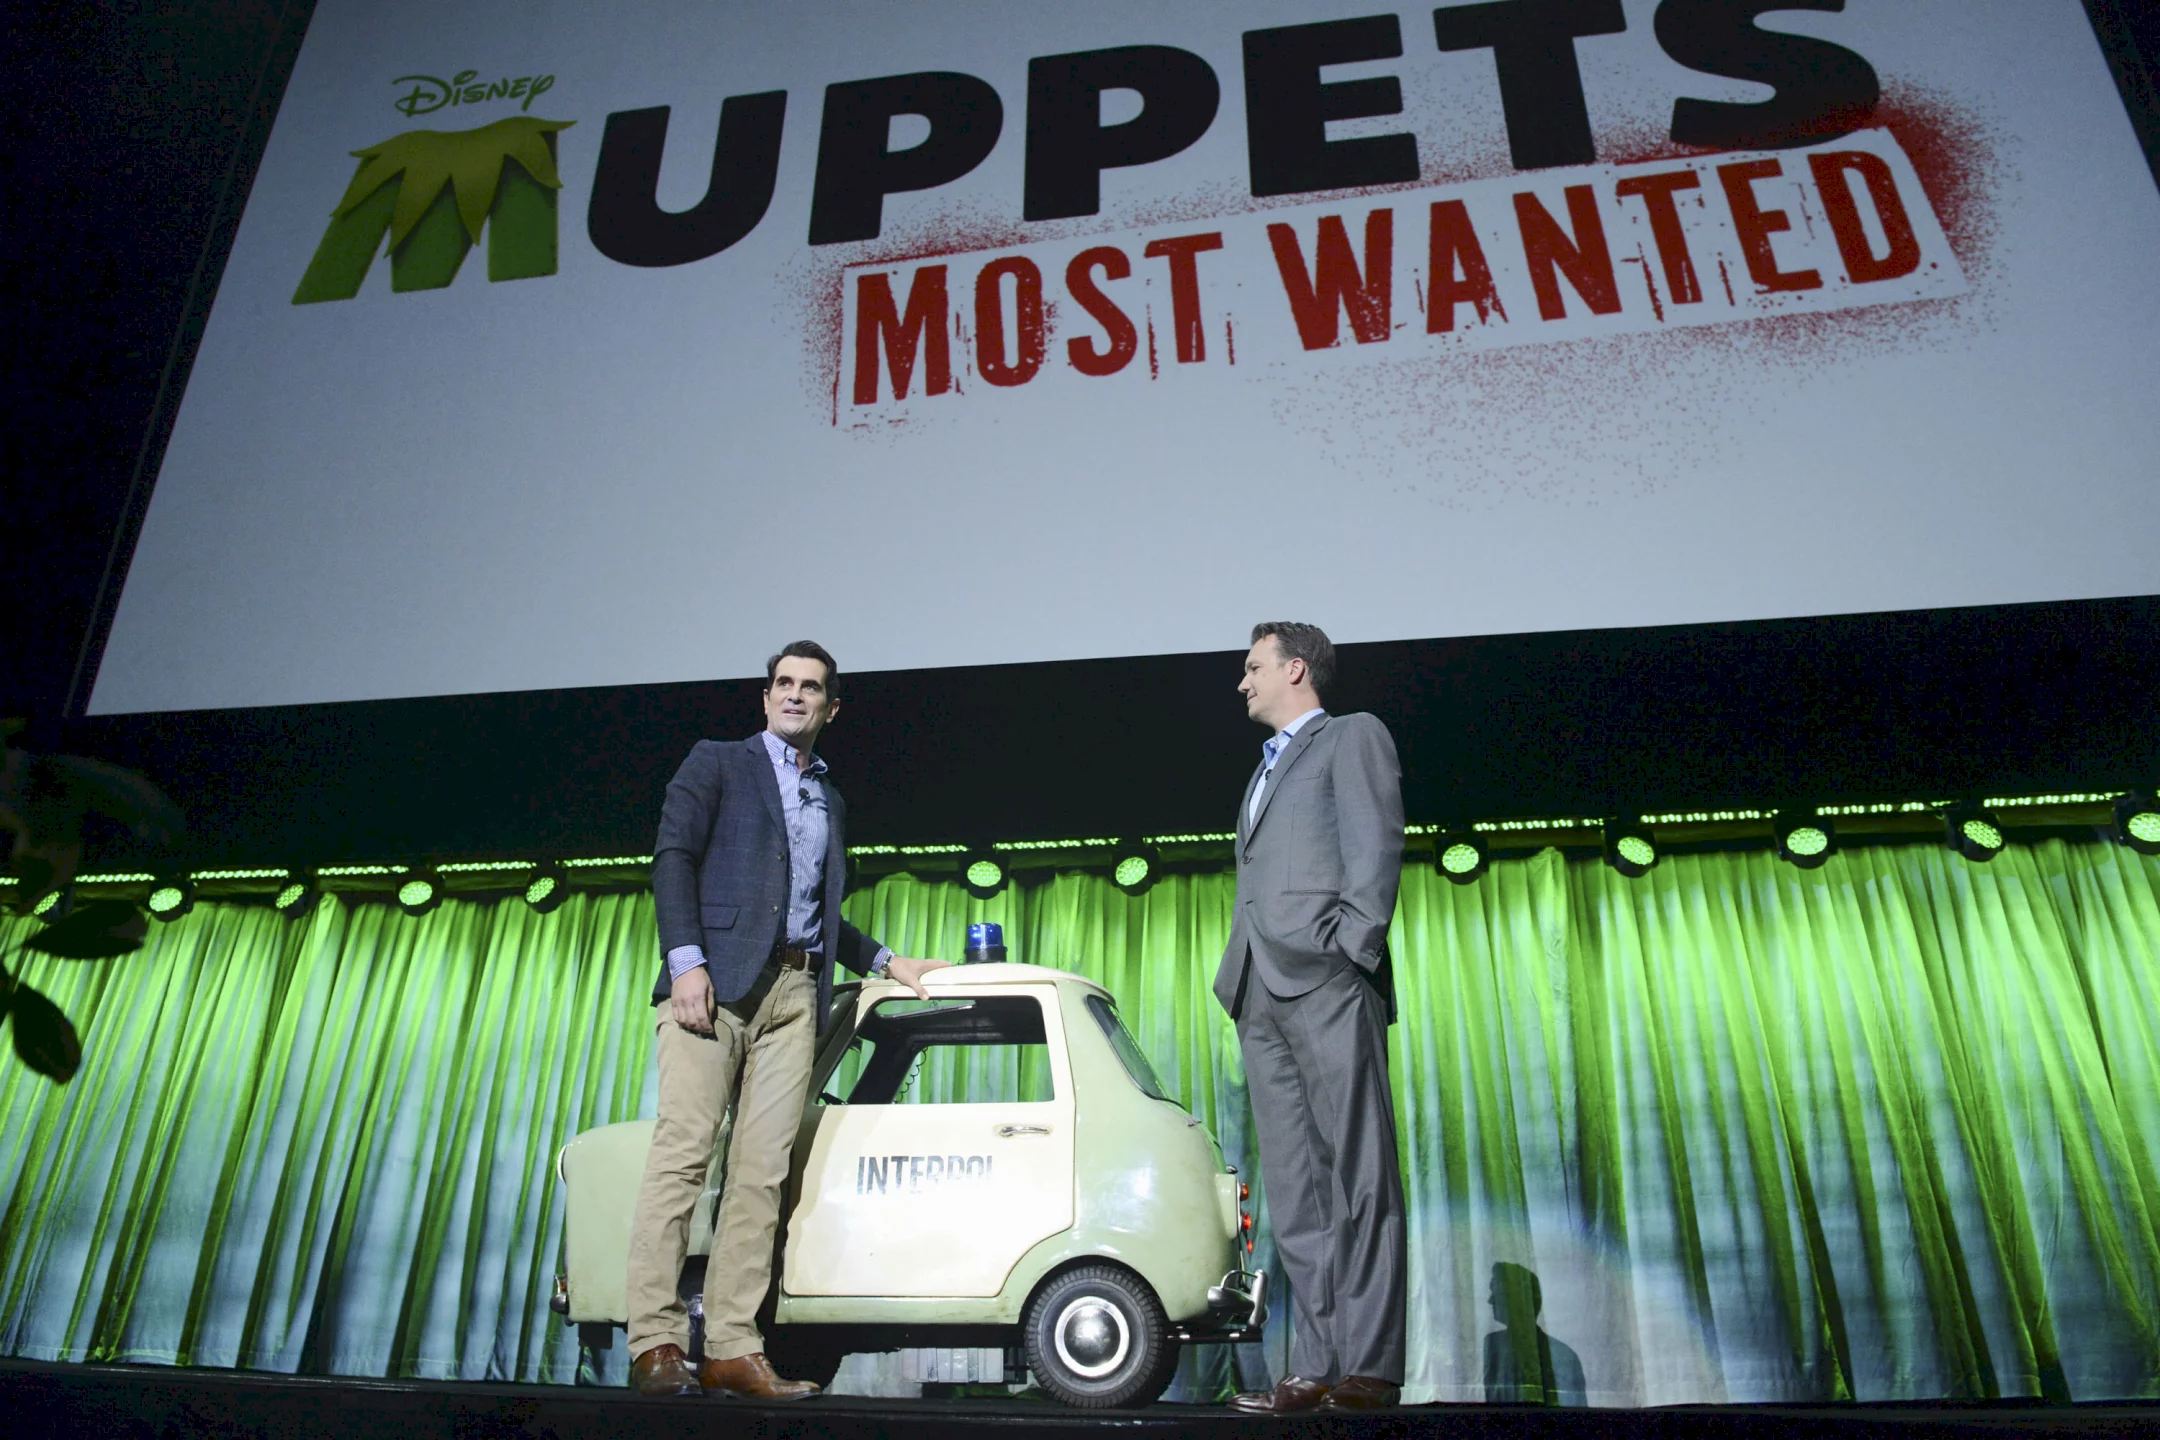 Photo 2 du film : Muppets most wanted 